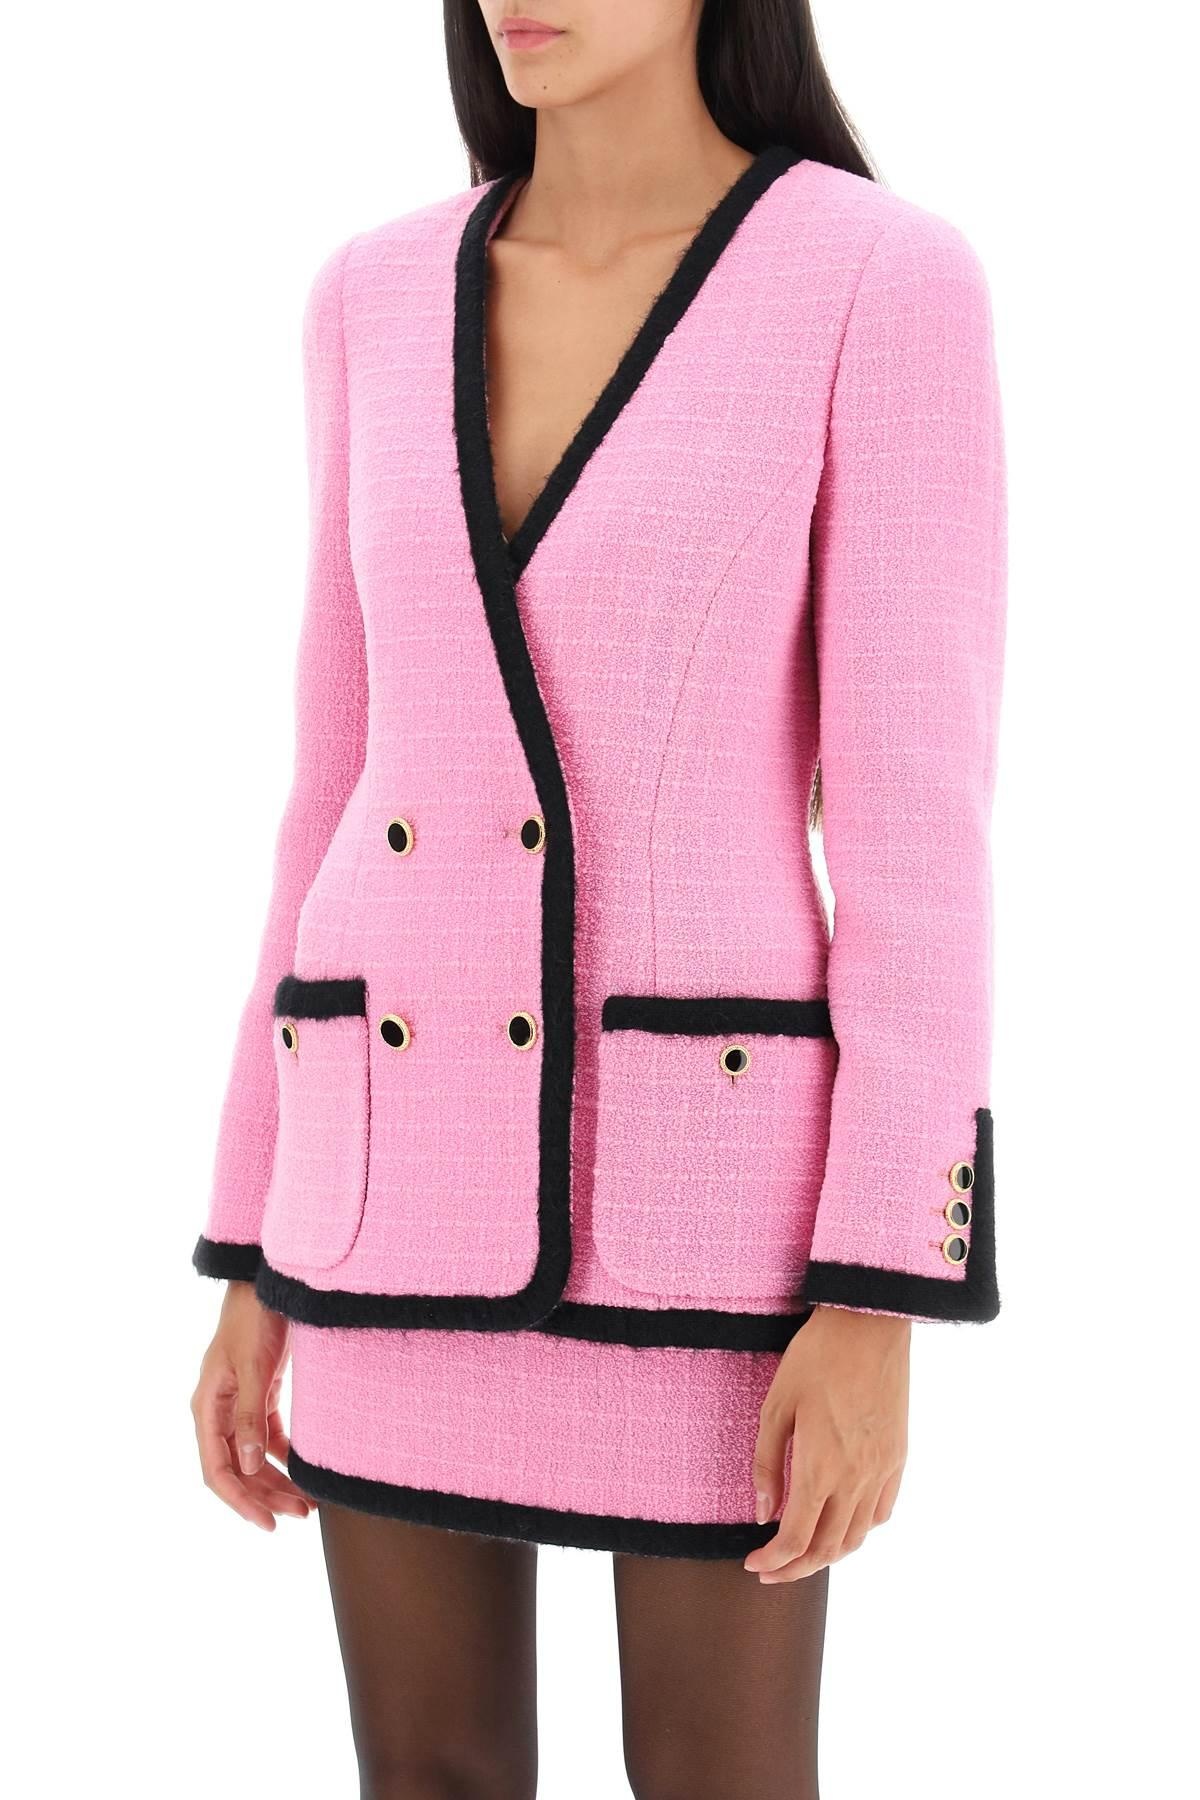 Alessandra Rich Double Breasted Boucle Tweed Jacket - 5